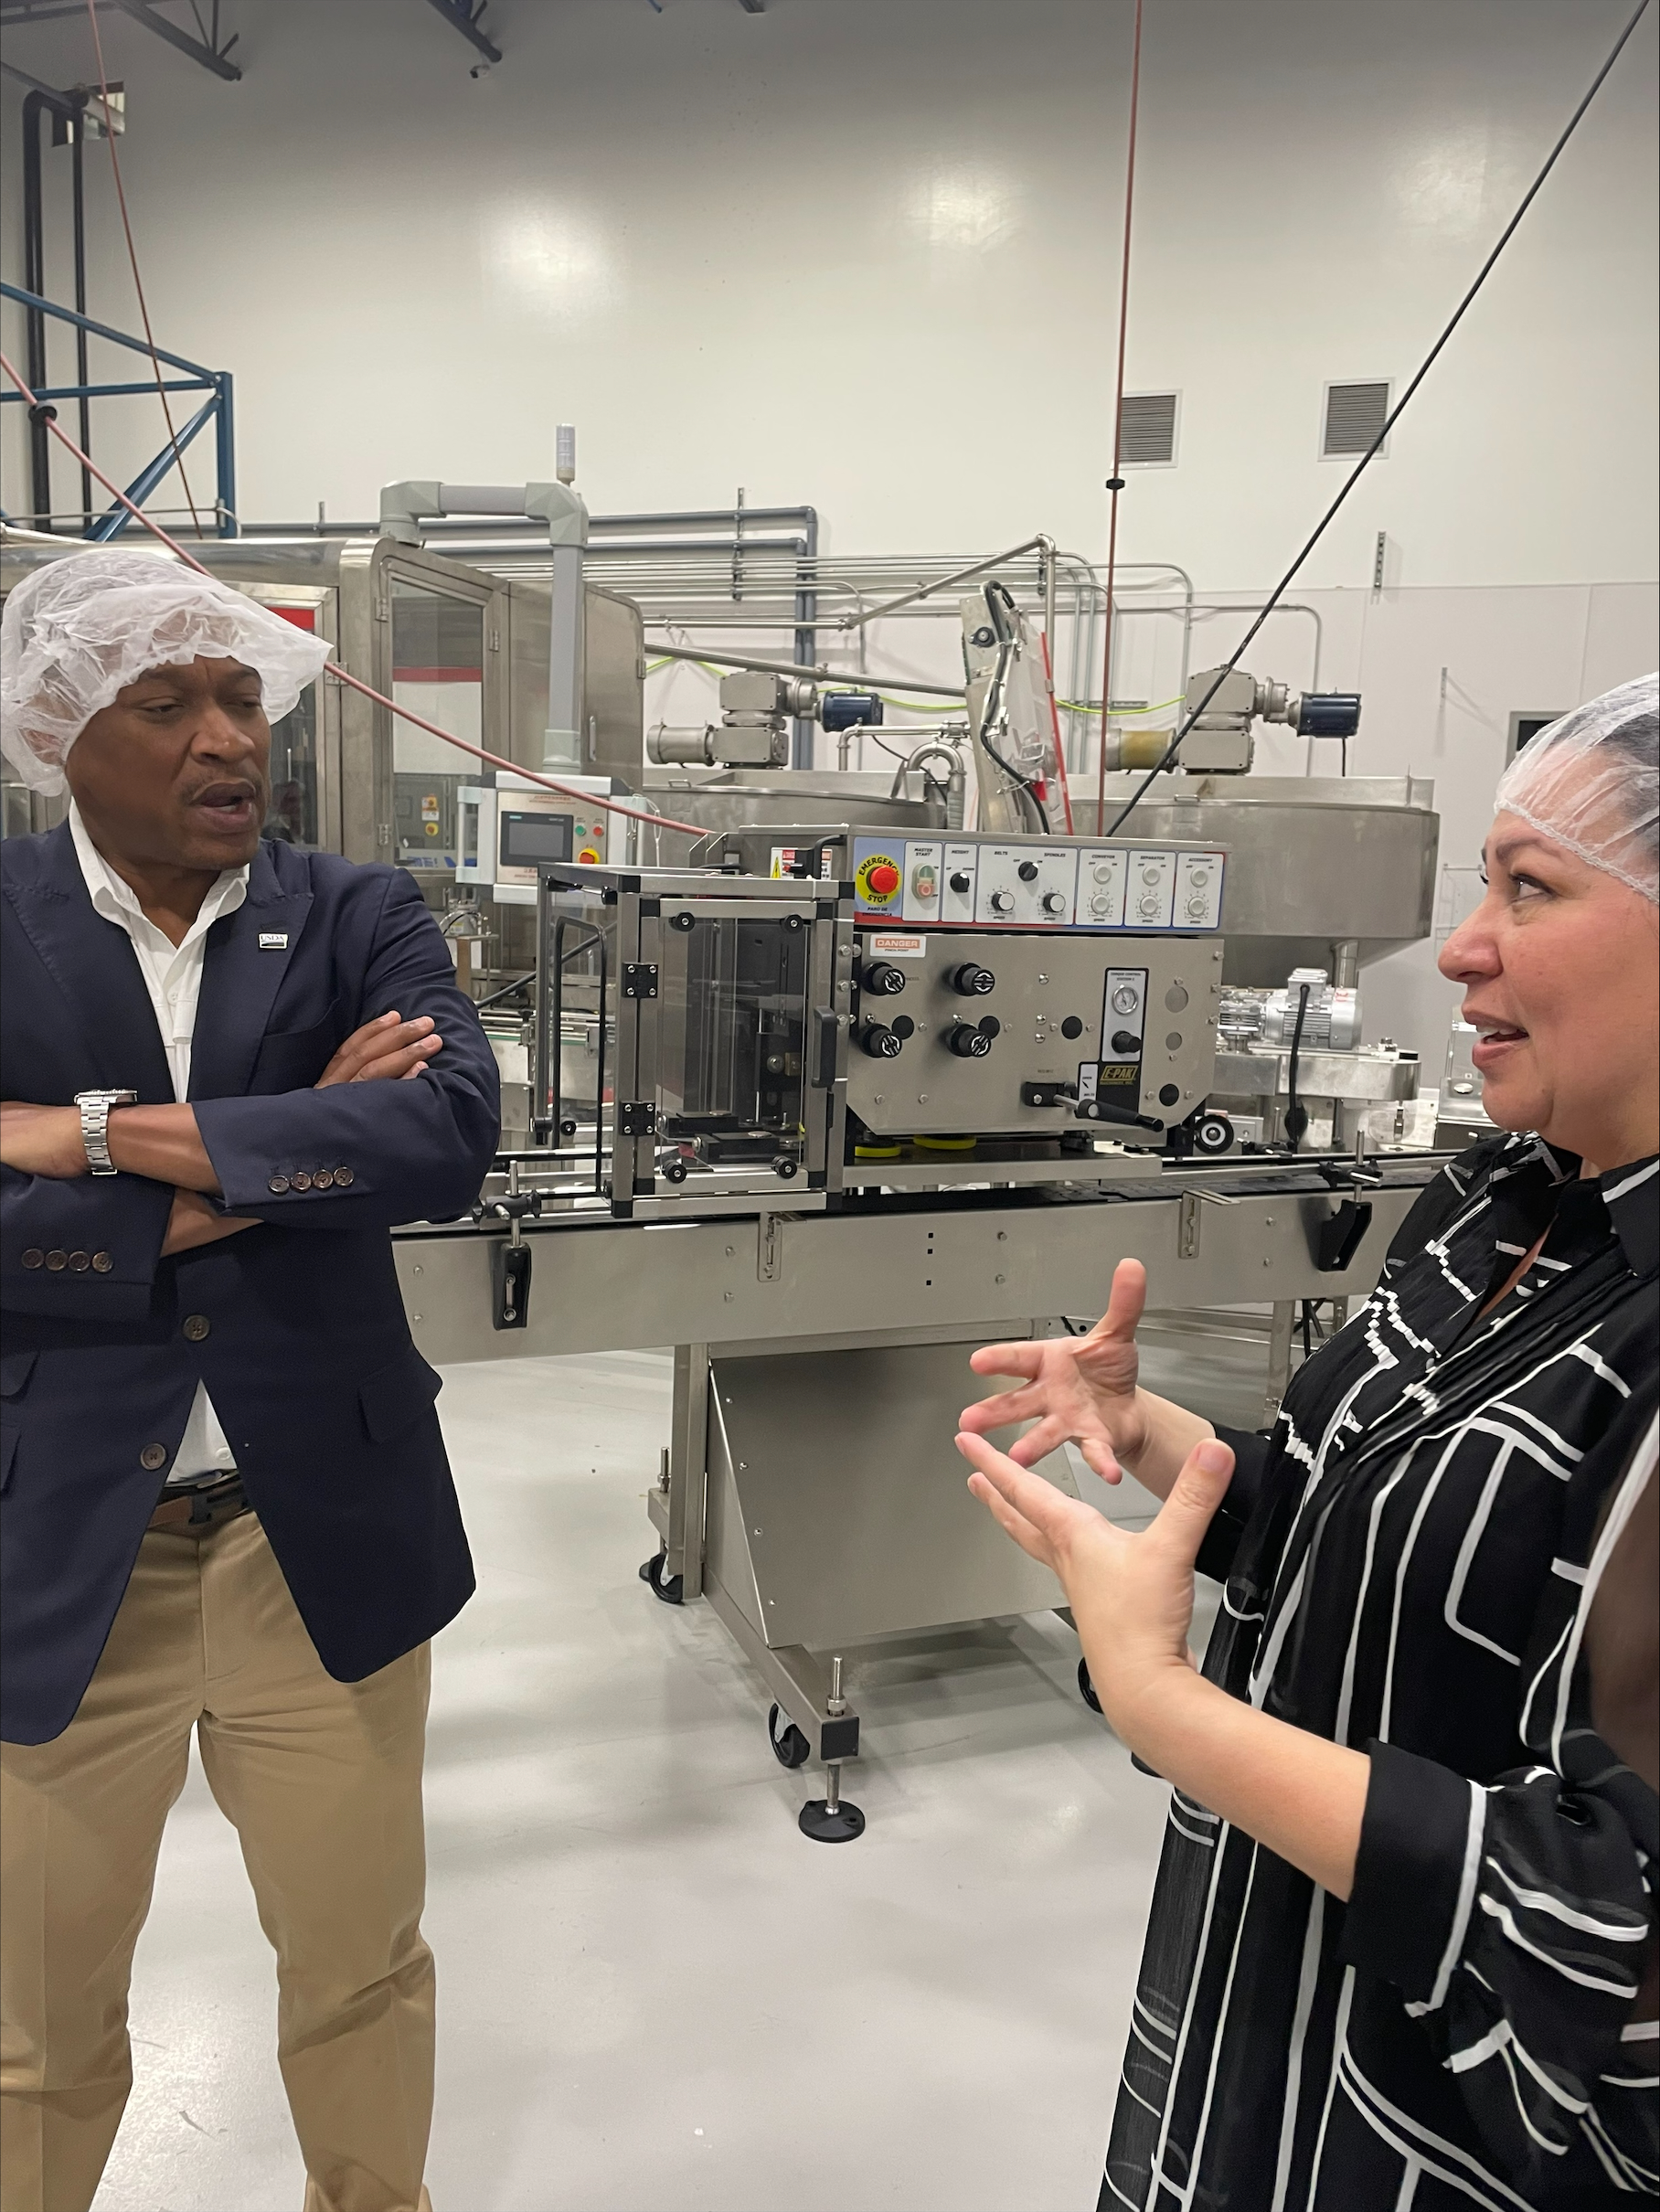 FAS Administrator Daniel Whitley chats with BNutty owner Carol Podolak inside the manufacturing facility in Portage, Indiana.